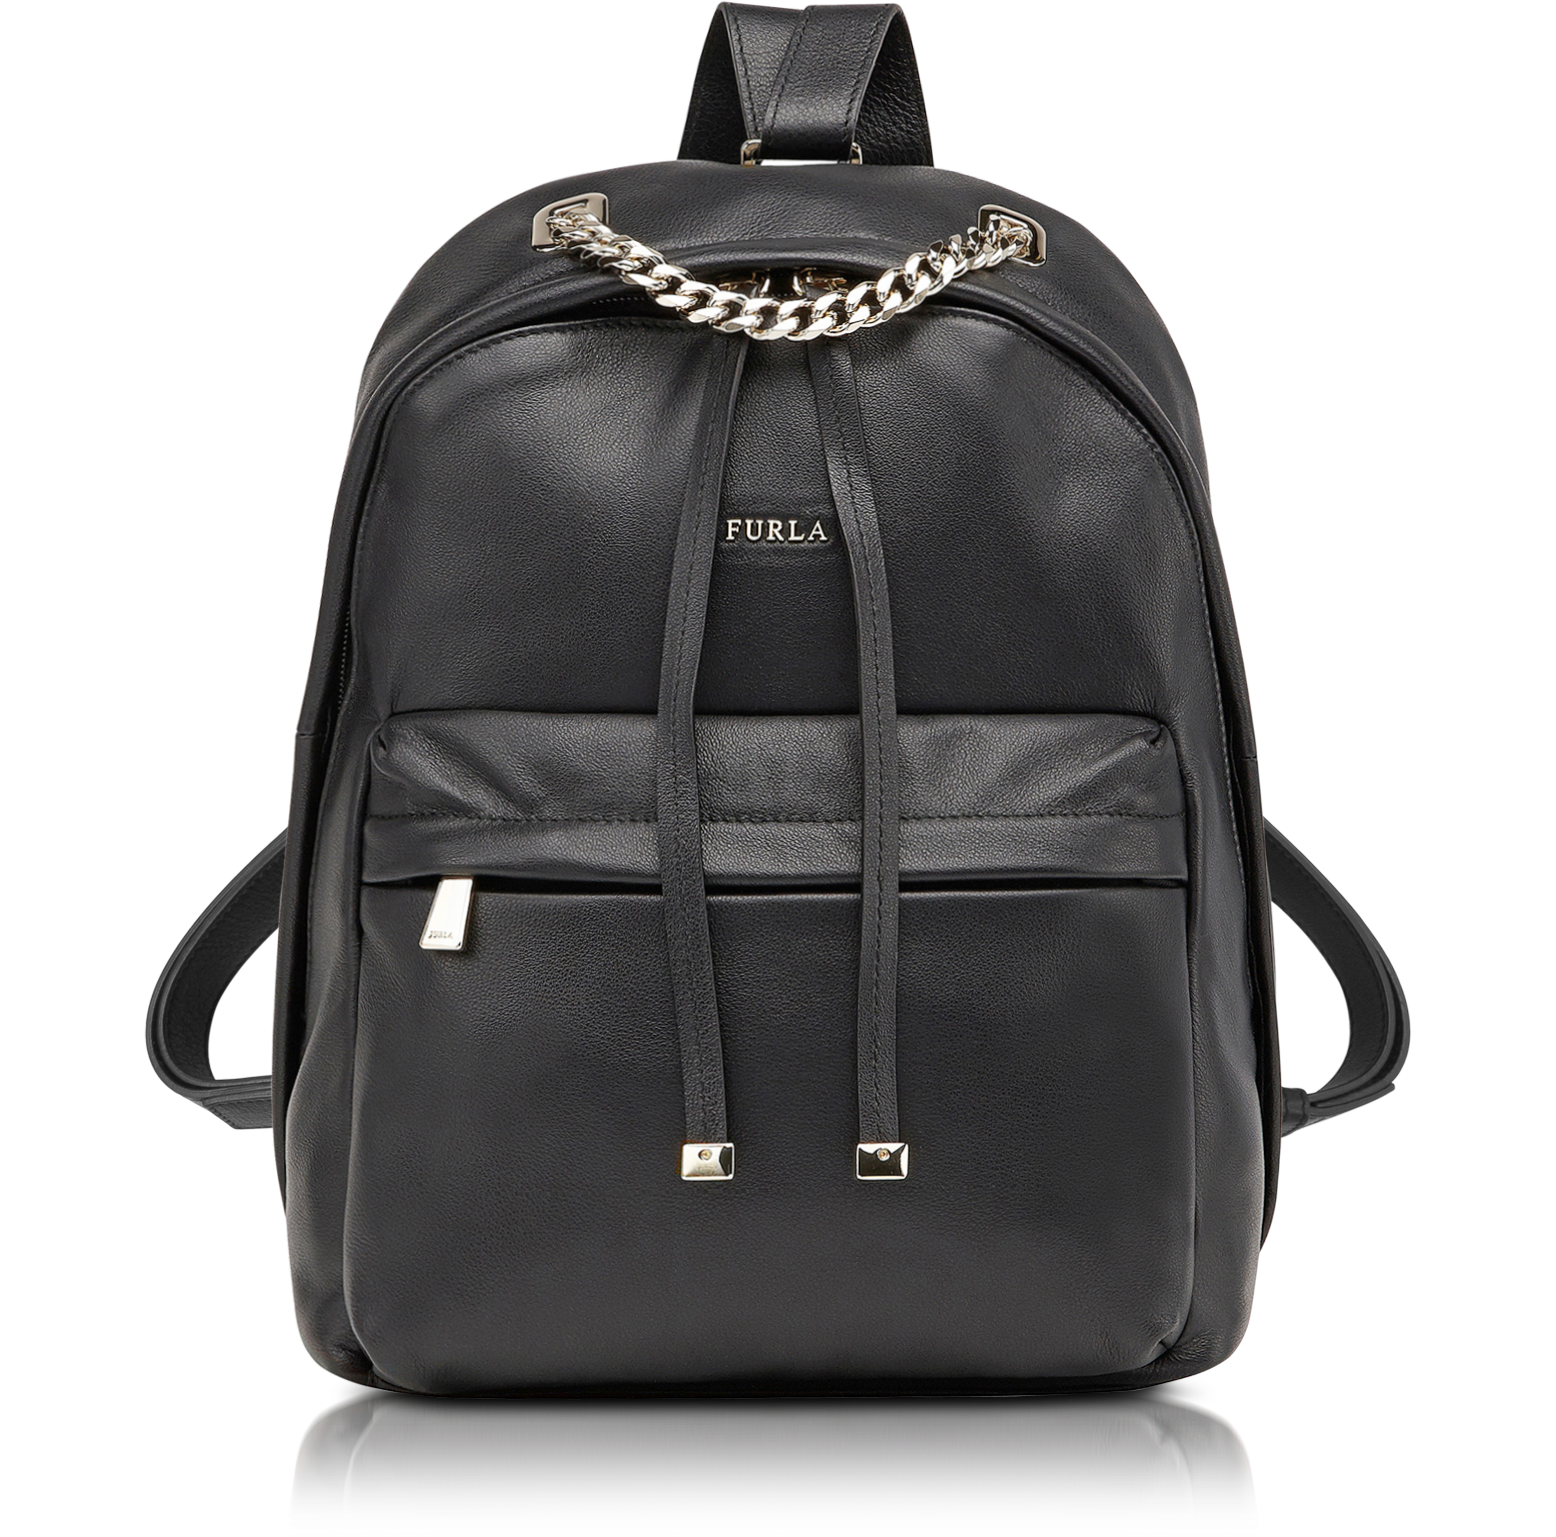 Furla Spy Bag Small Onyx Leather Backpack at FORZIERI